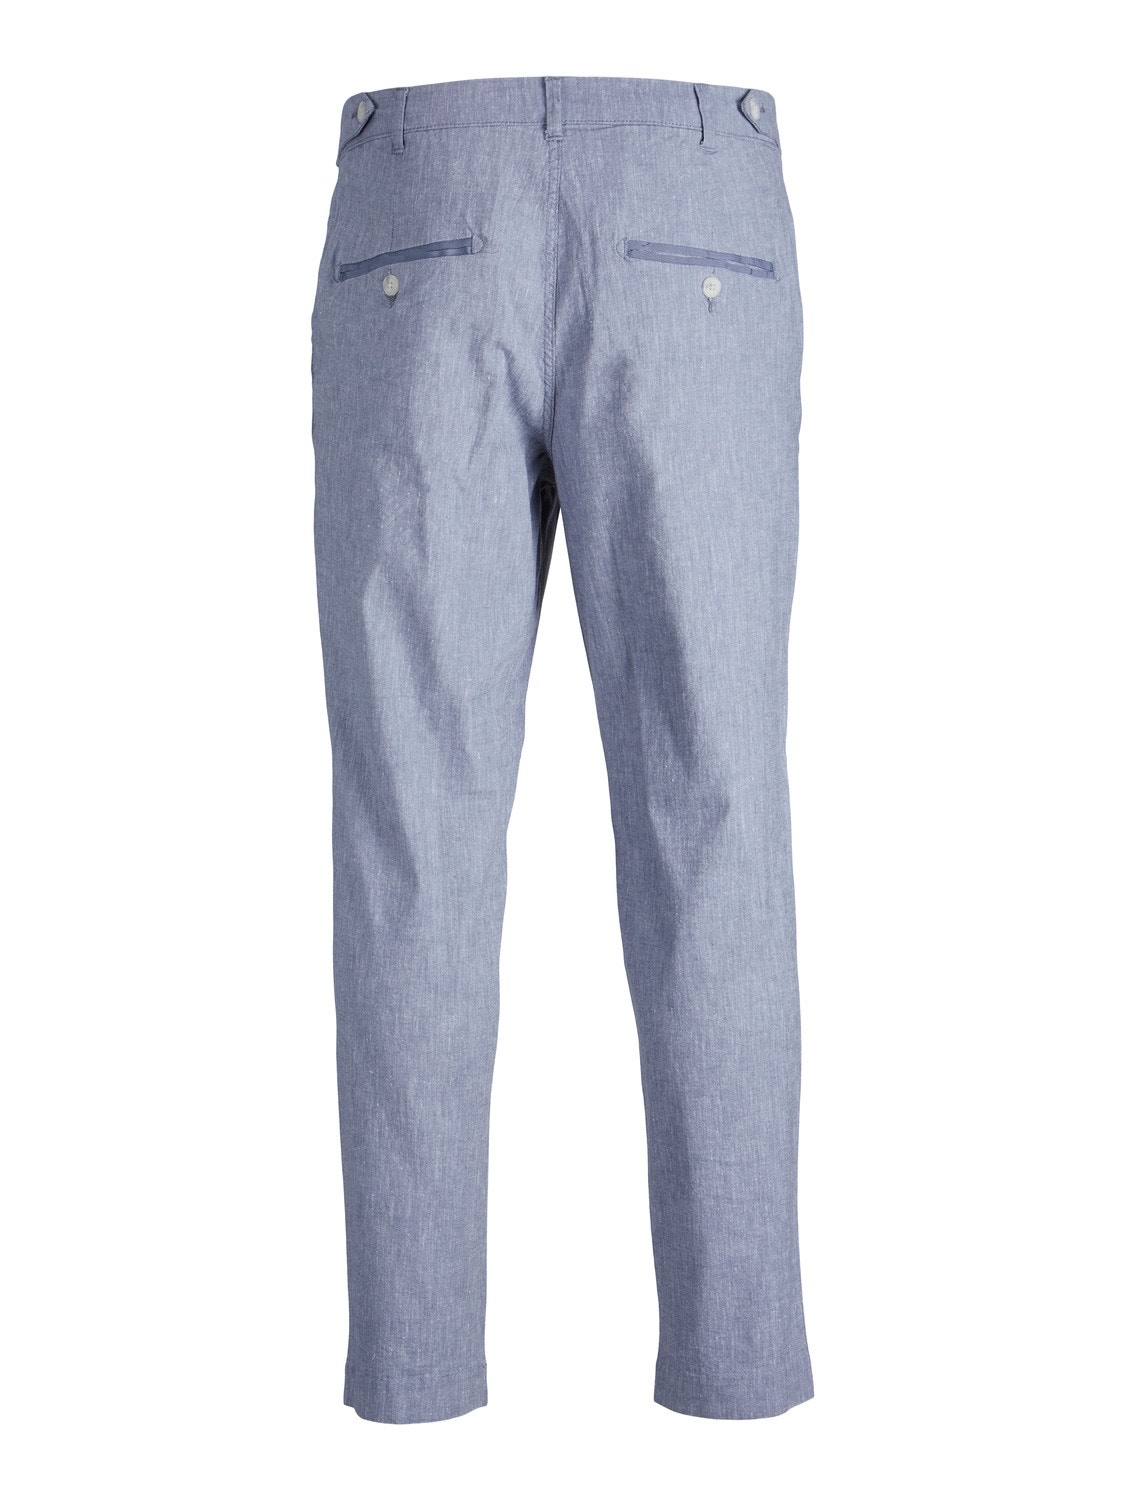 Jack & Jones Carrot fit Chino trousers -Grasaille - 12210112